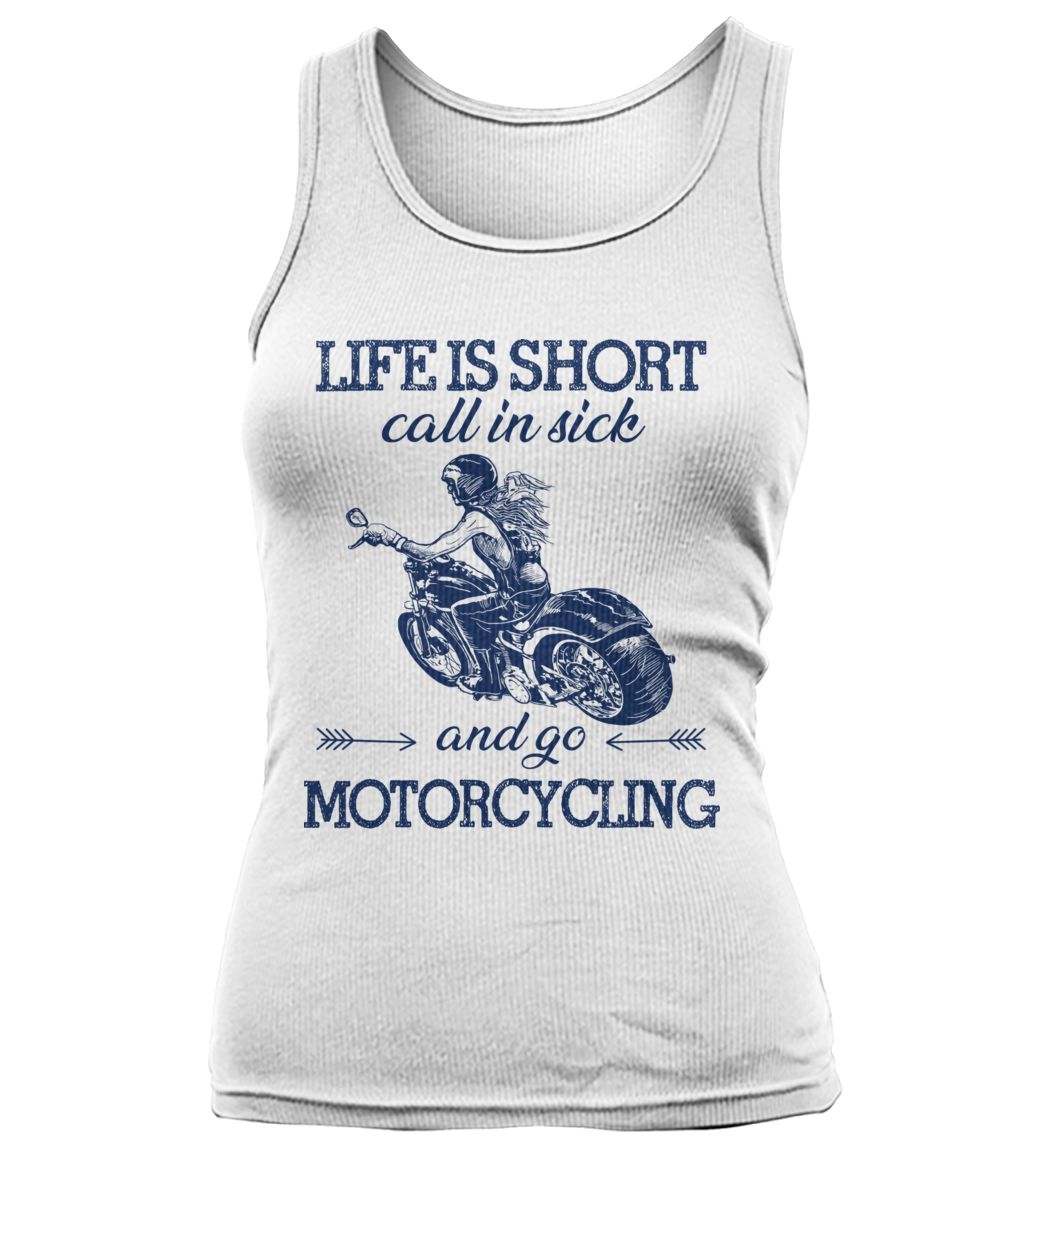 Life is short call in sick and go motorcycling women's tank top